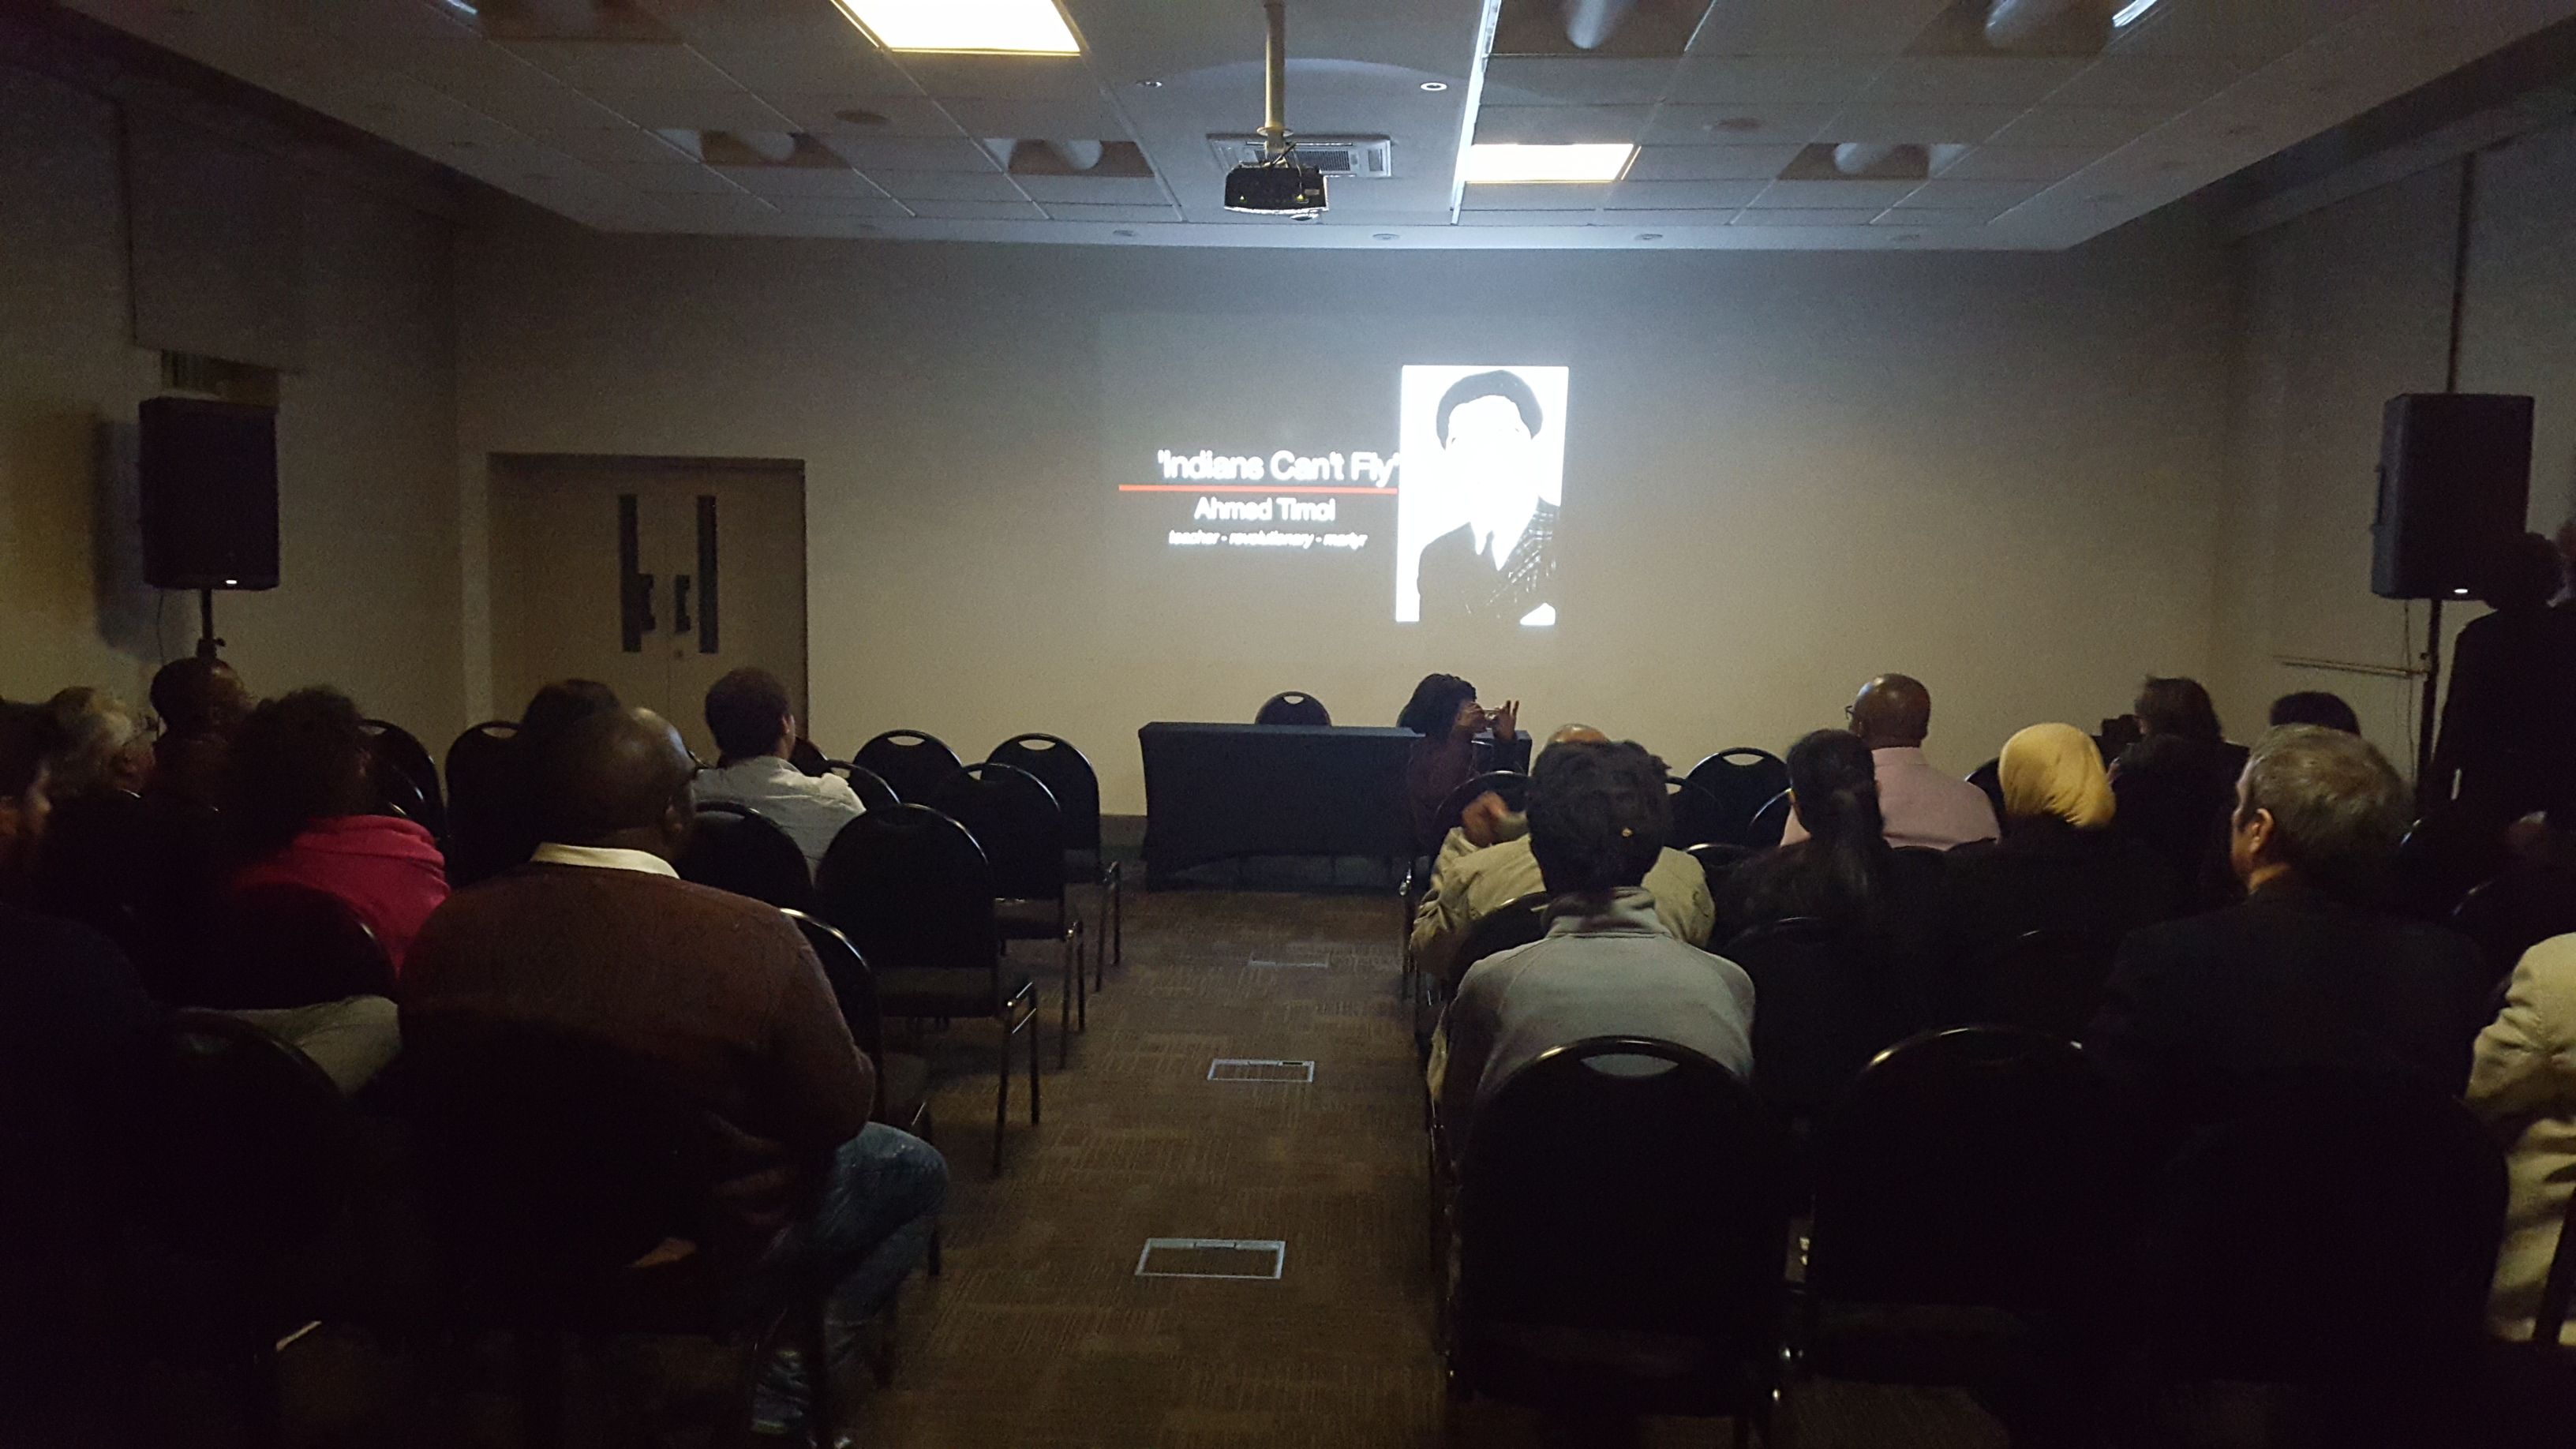 Screening of Indians cant fly documentary